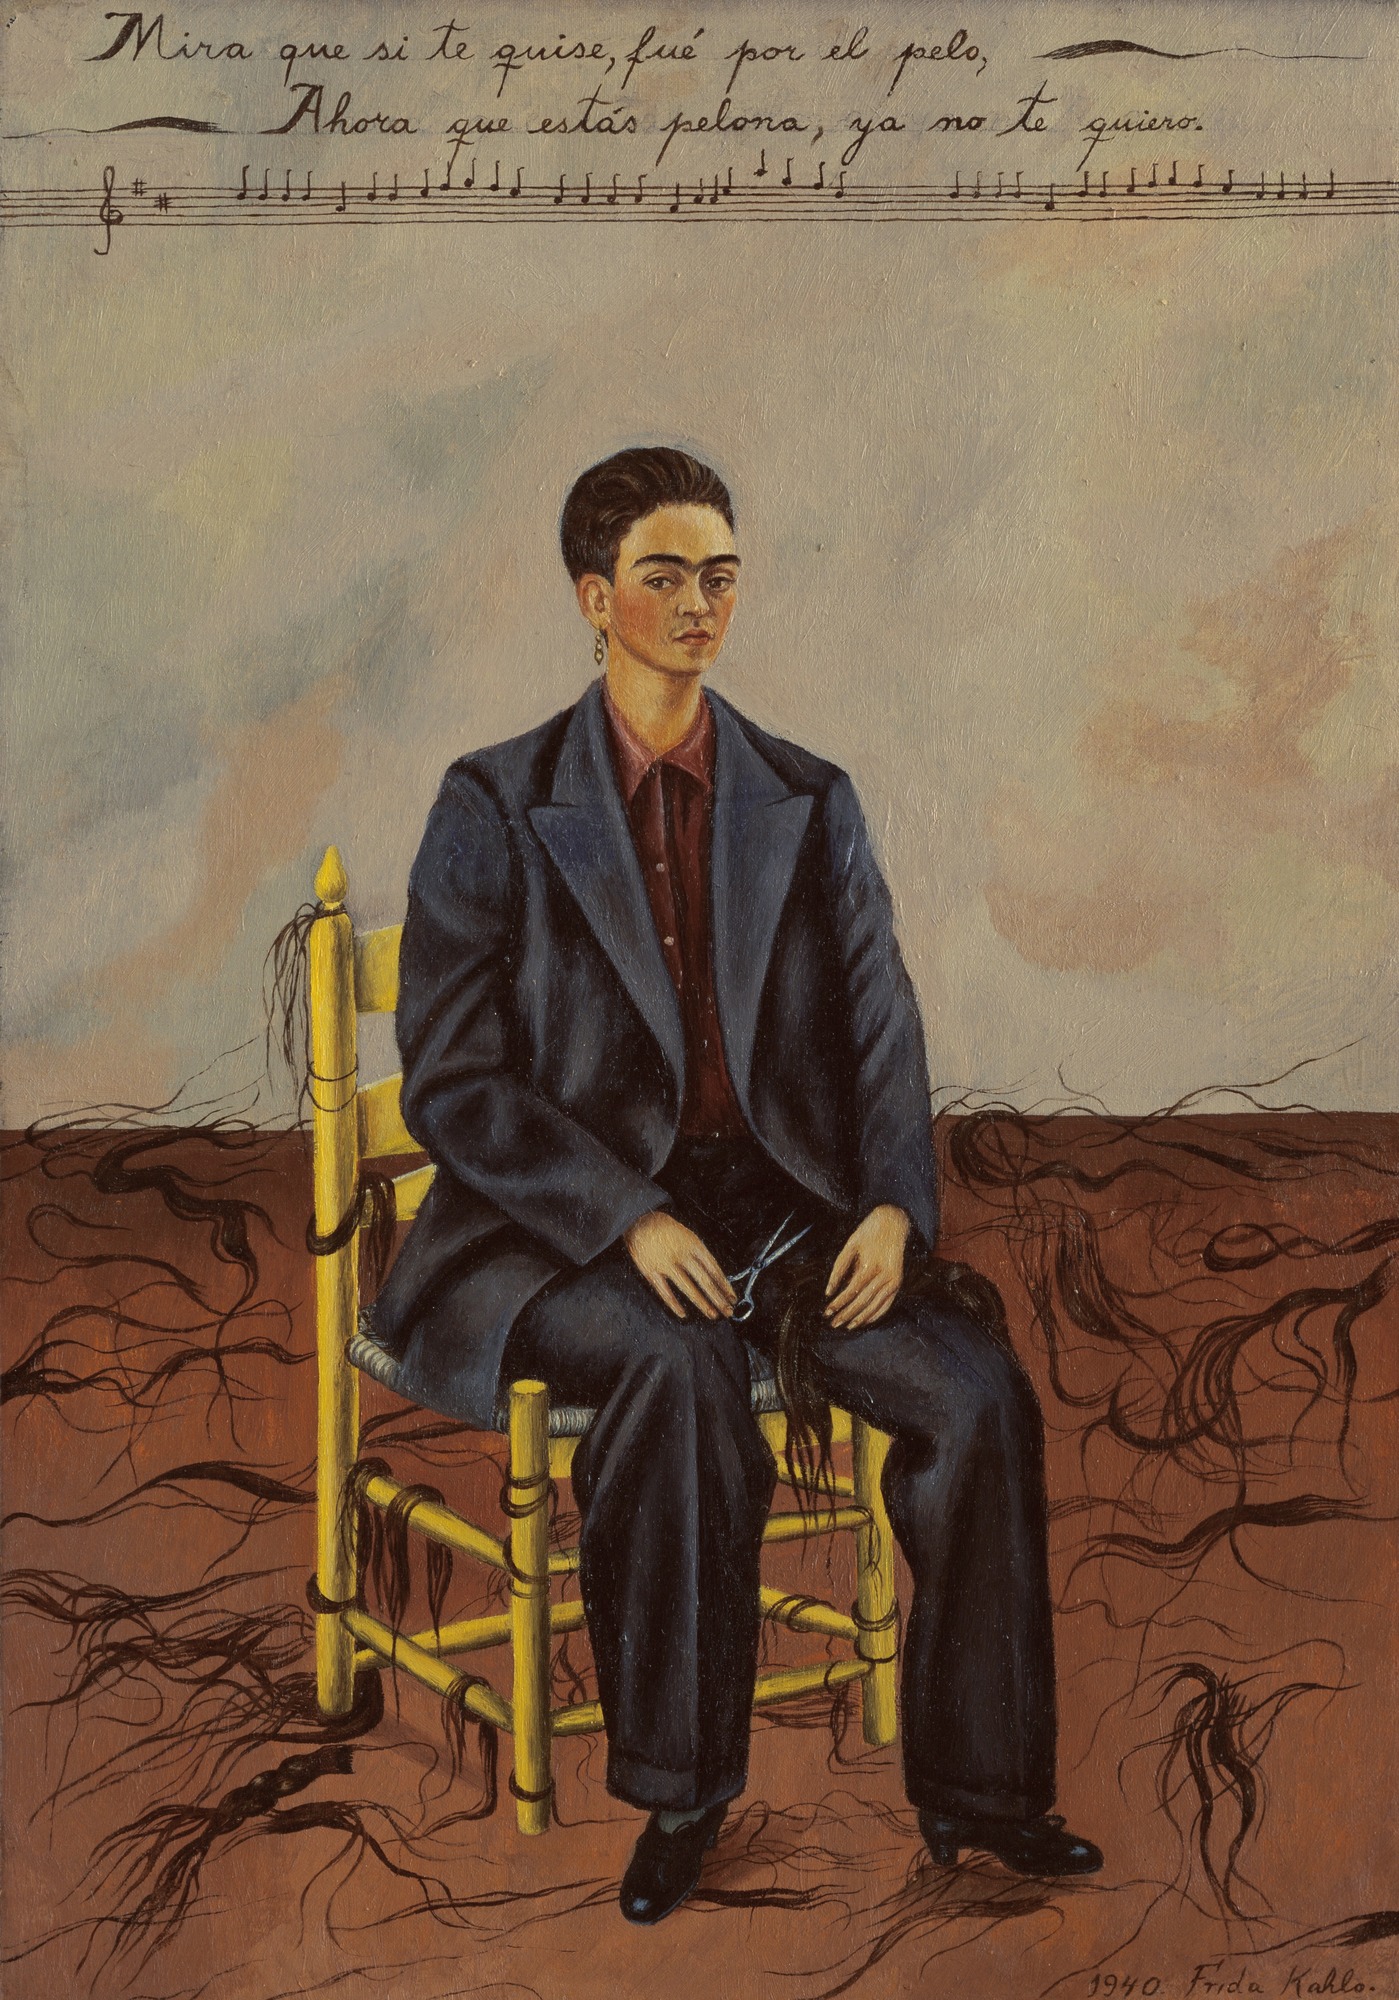 Frida Kahlo, Self-Portrait with Cropped Hair, 1940, collectie MoMA, New York